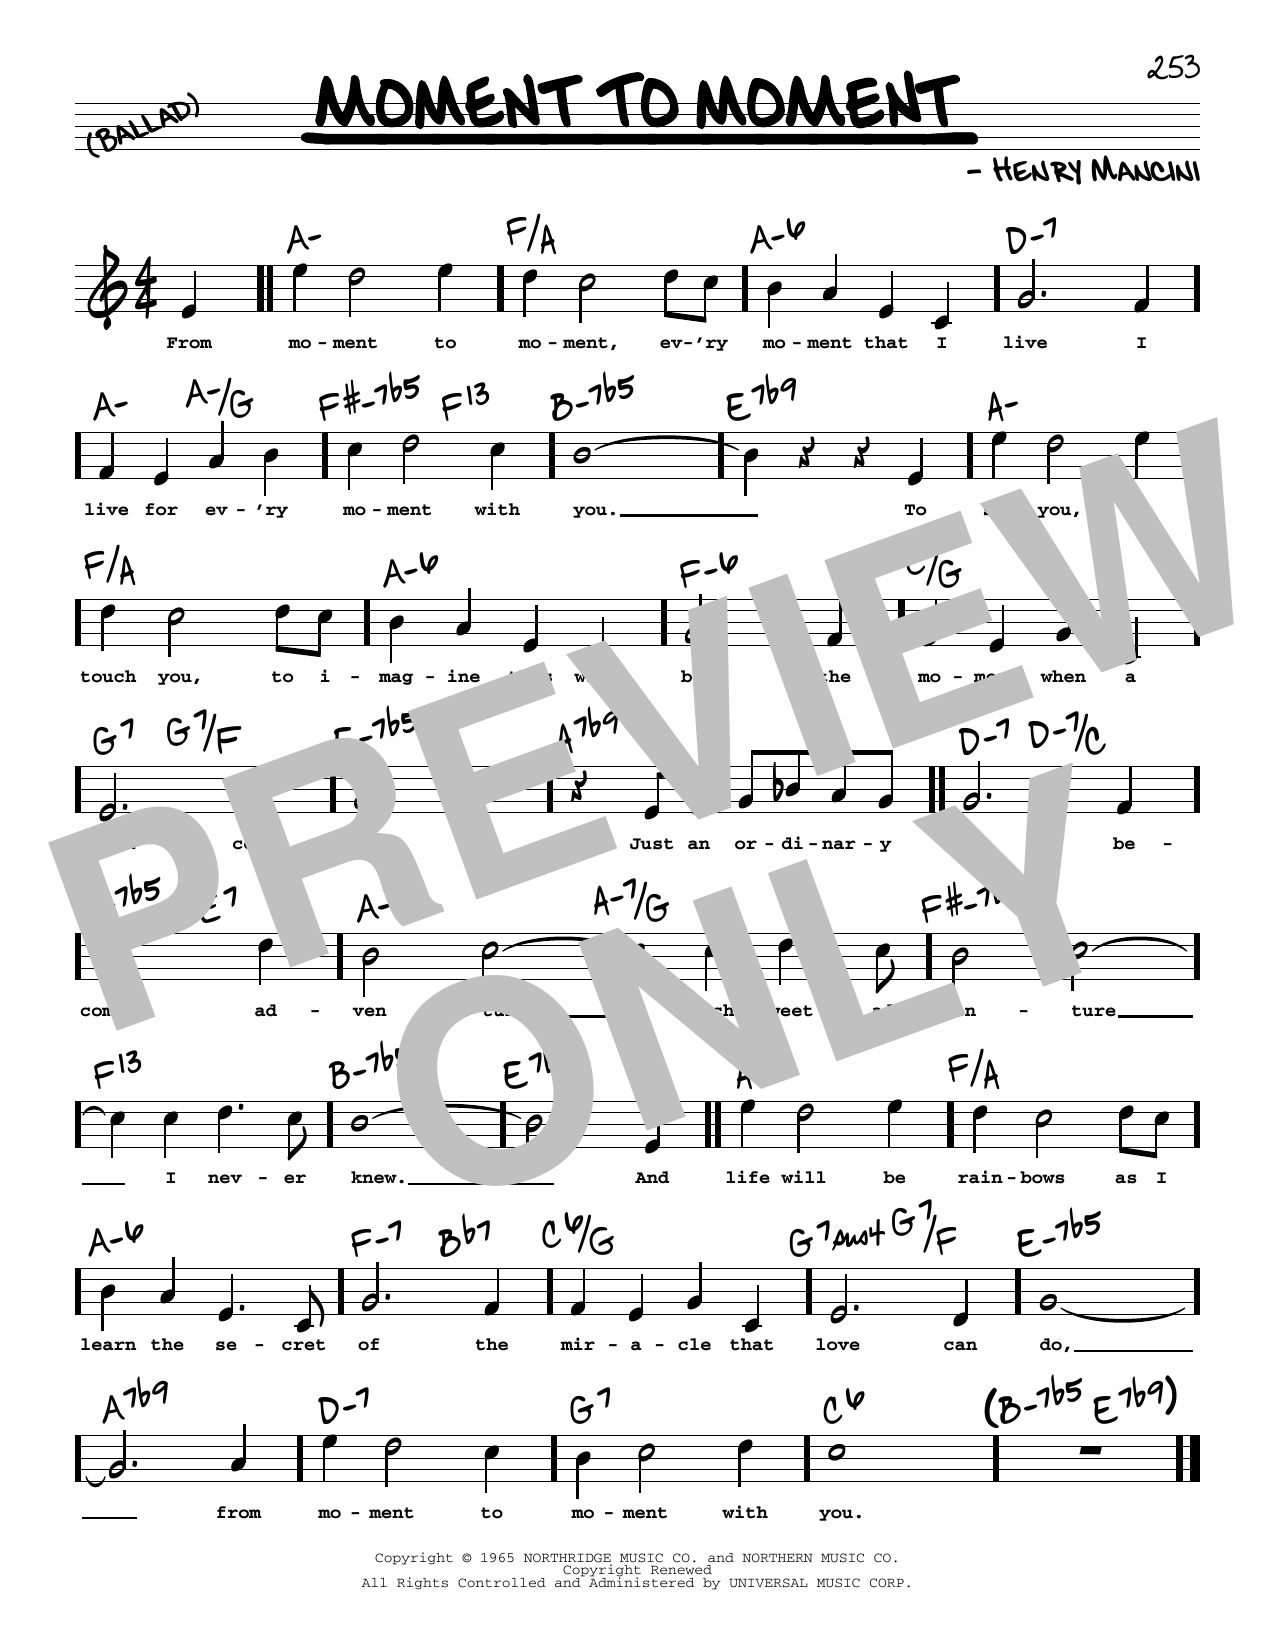 Download Henry Mancini Moment To Moment (High Voice) Sheet Music